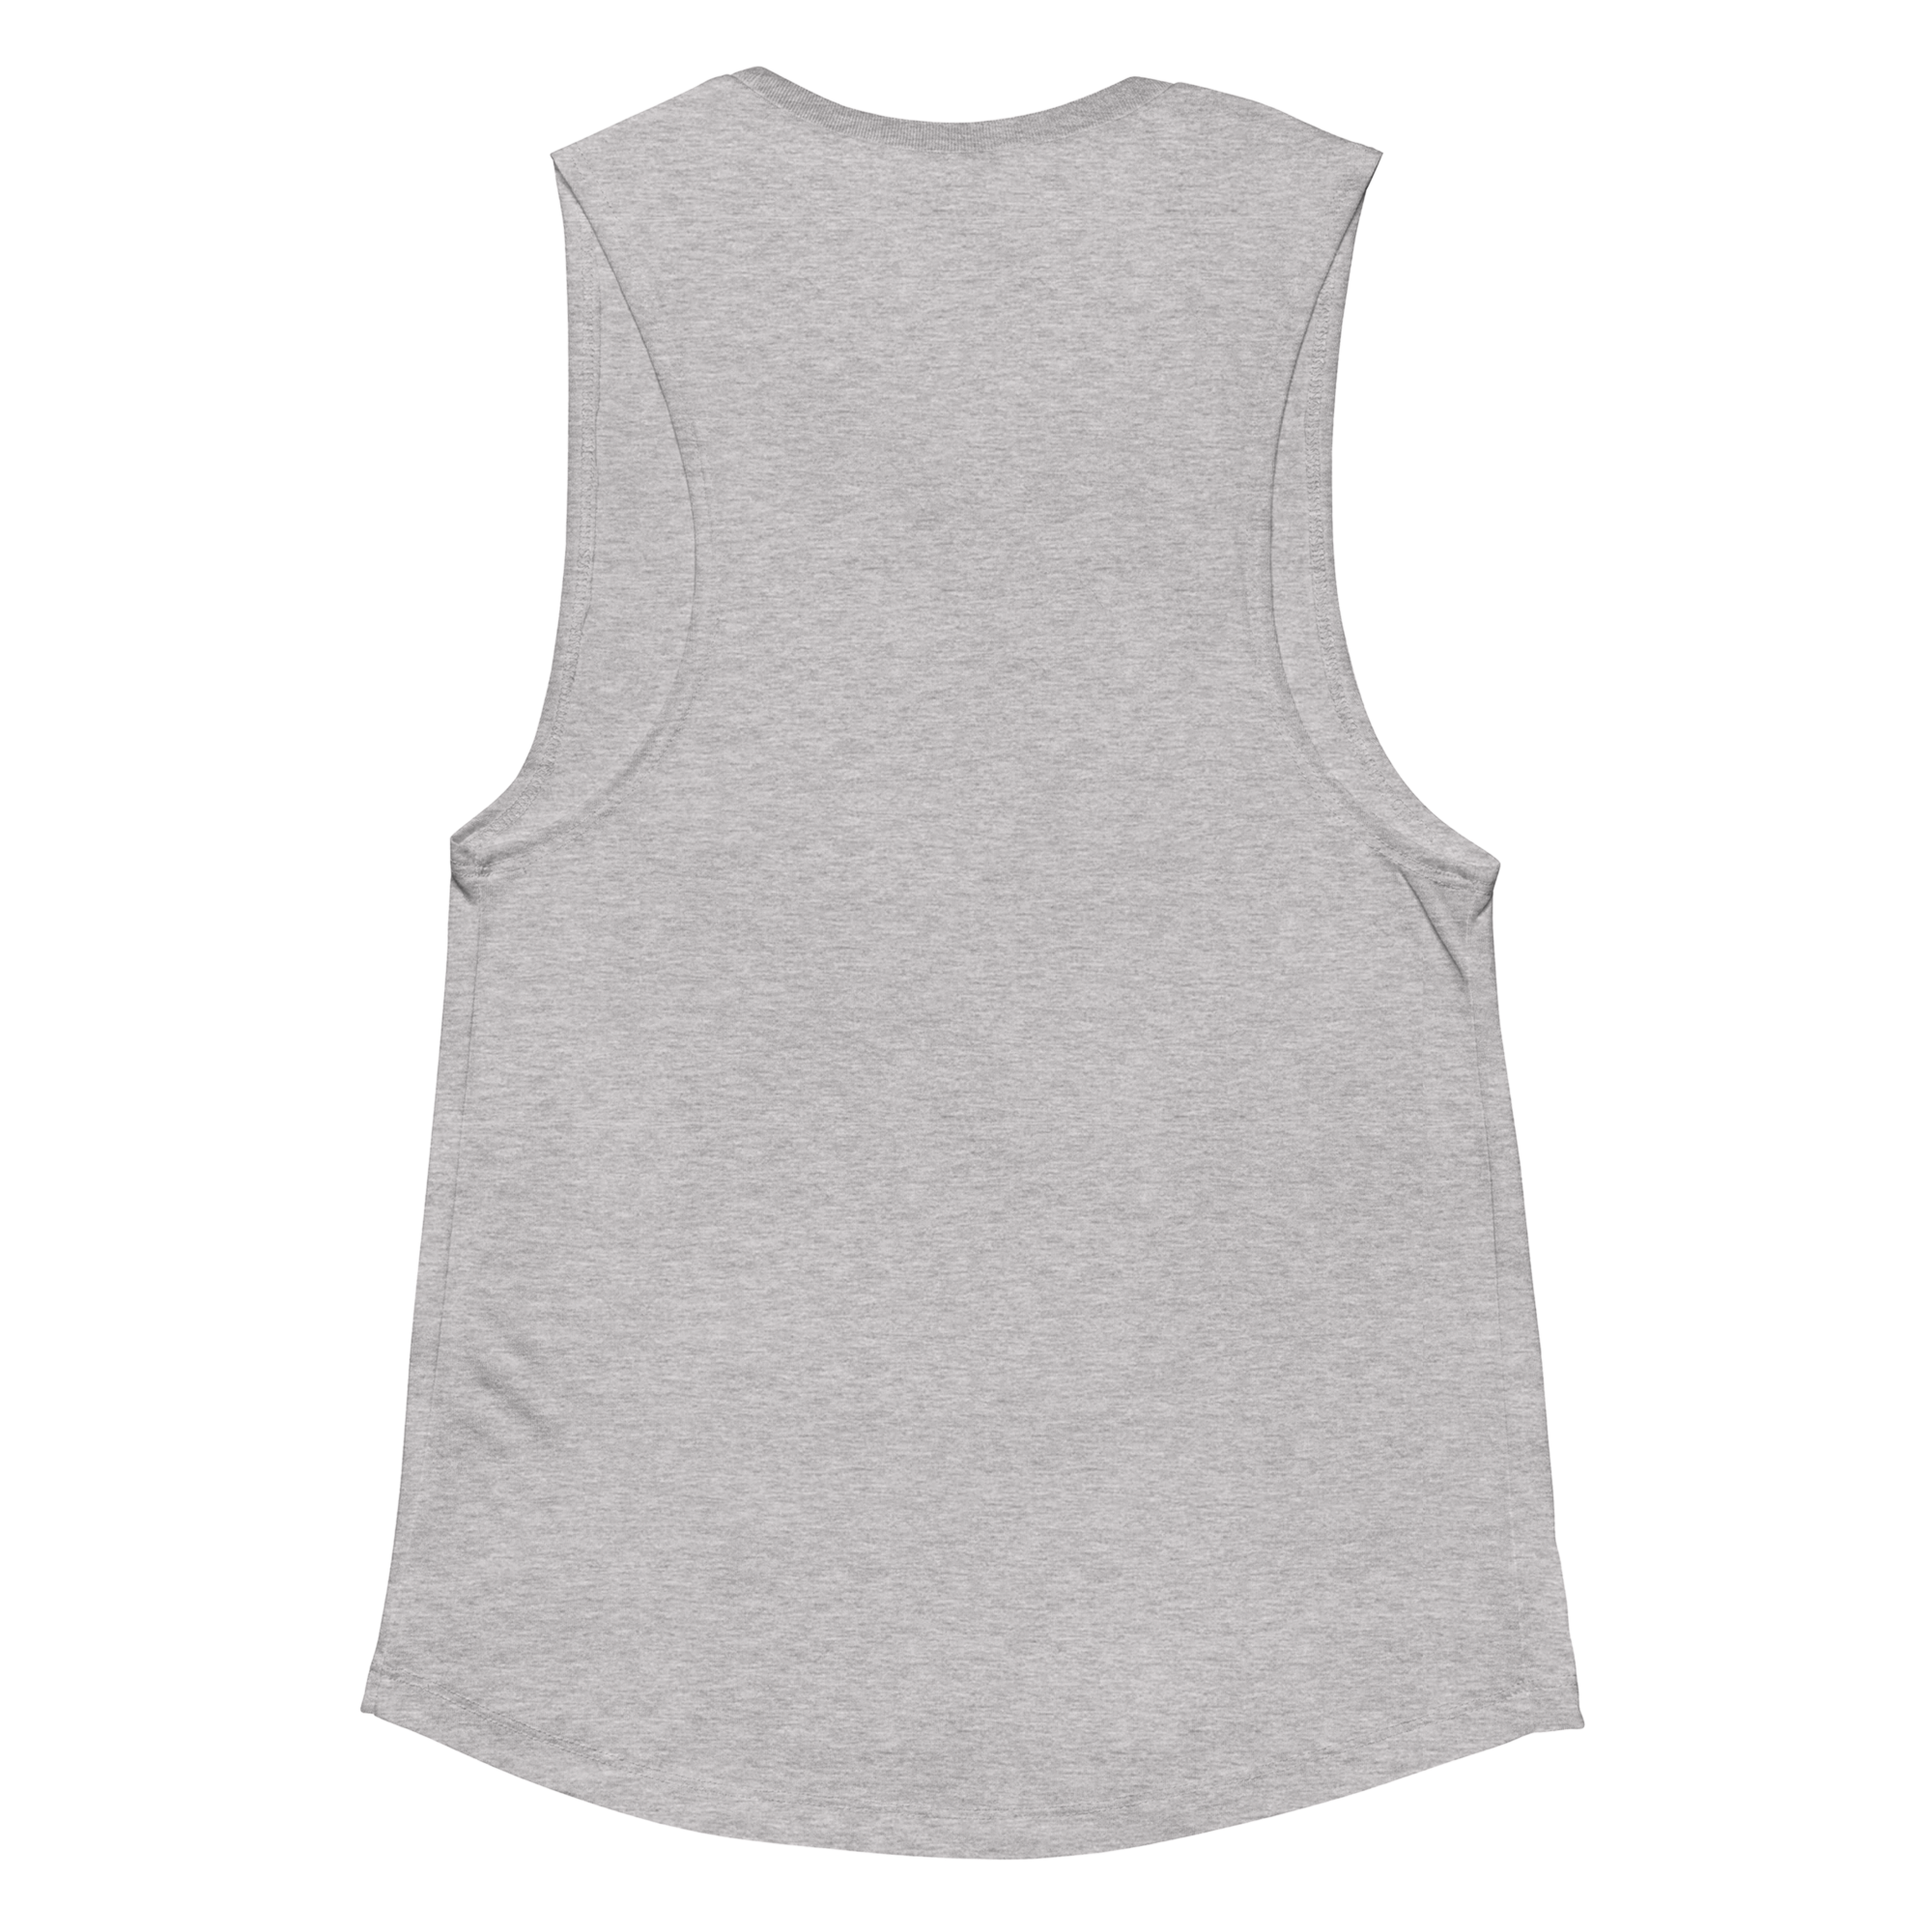 maillot.co | Collage Muscle Tank Top - Bold Heather | back view light grey racerback tank top